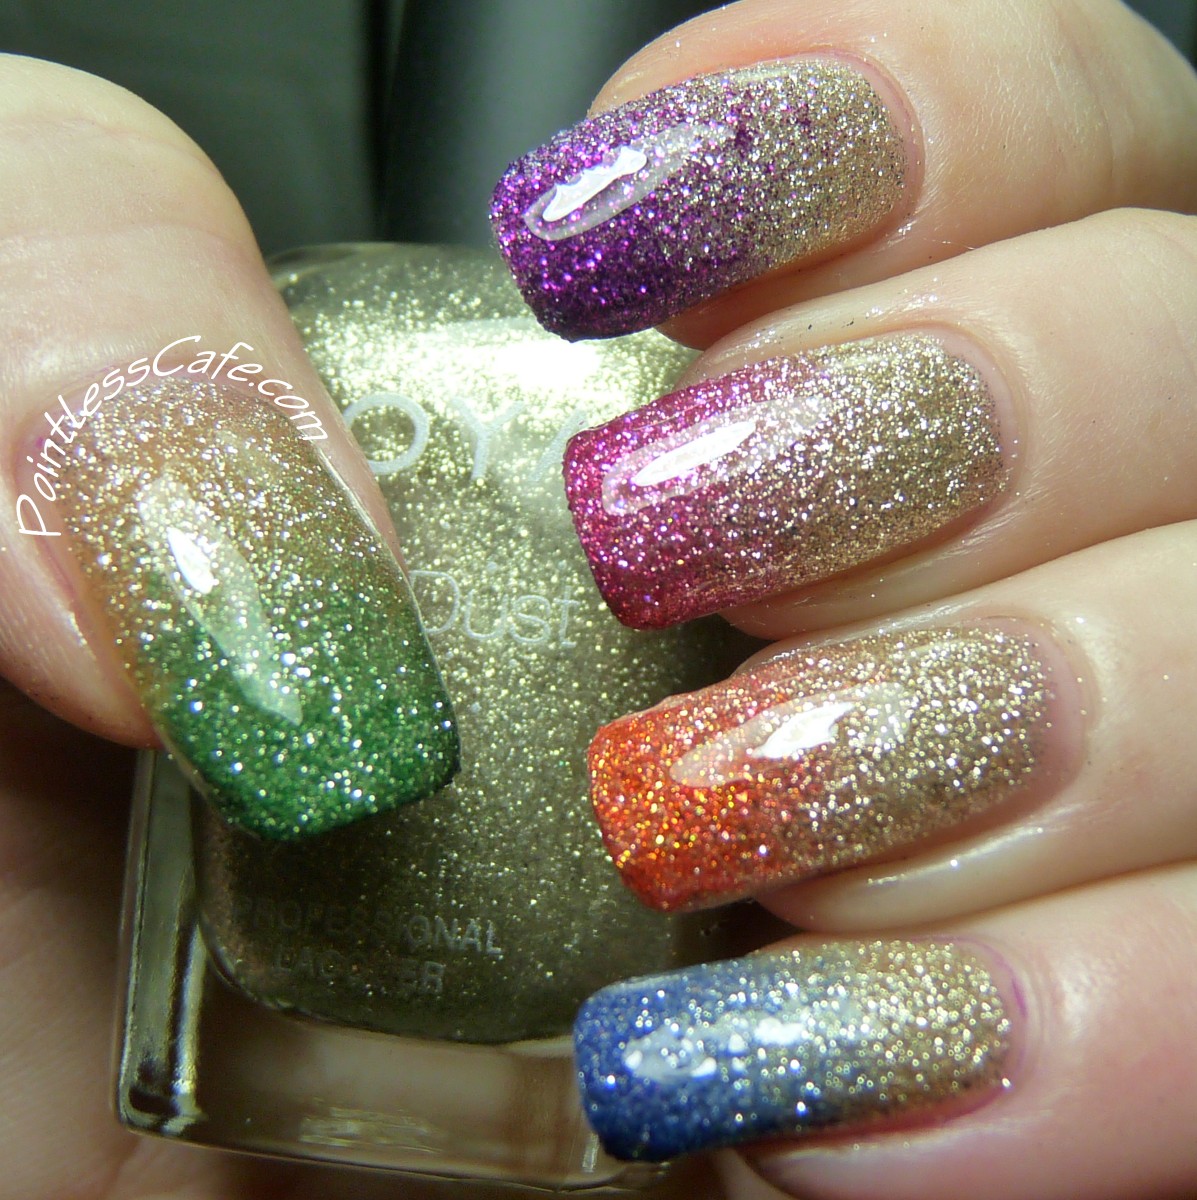 Zoya PixieDust Fall 2013 Collection - Swatches and Review | Pointless Cafe